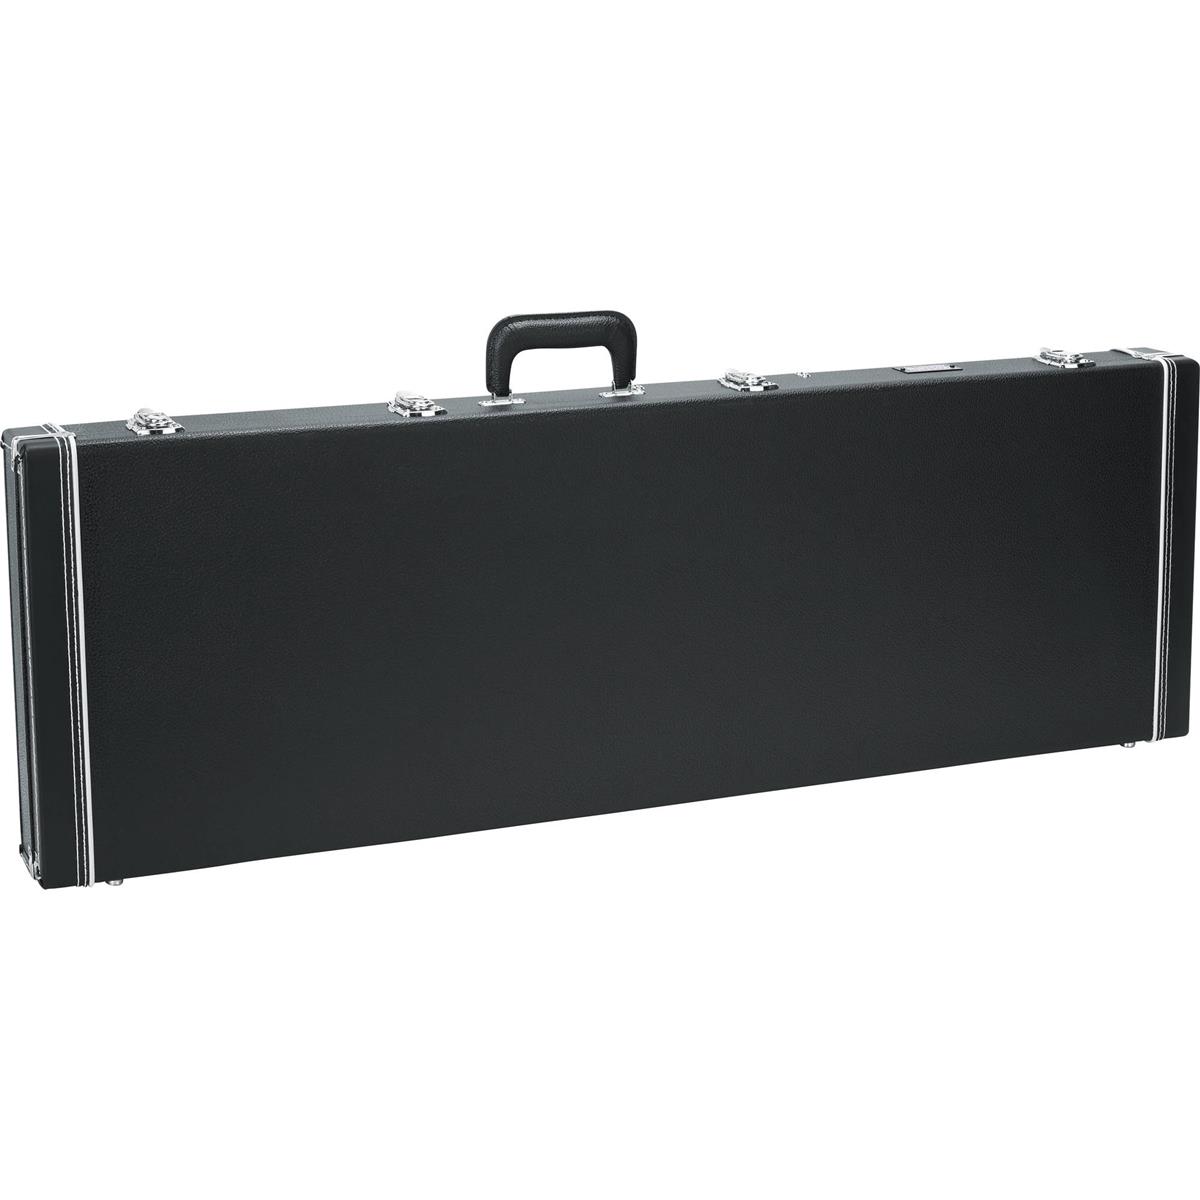 Image of Gator Cases GW-BASS Deluxe Wooden Case for Bass Guitars